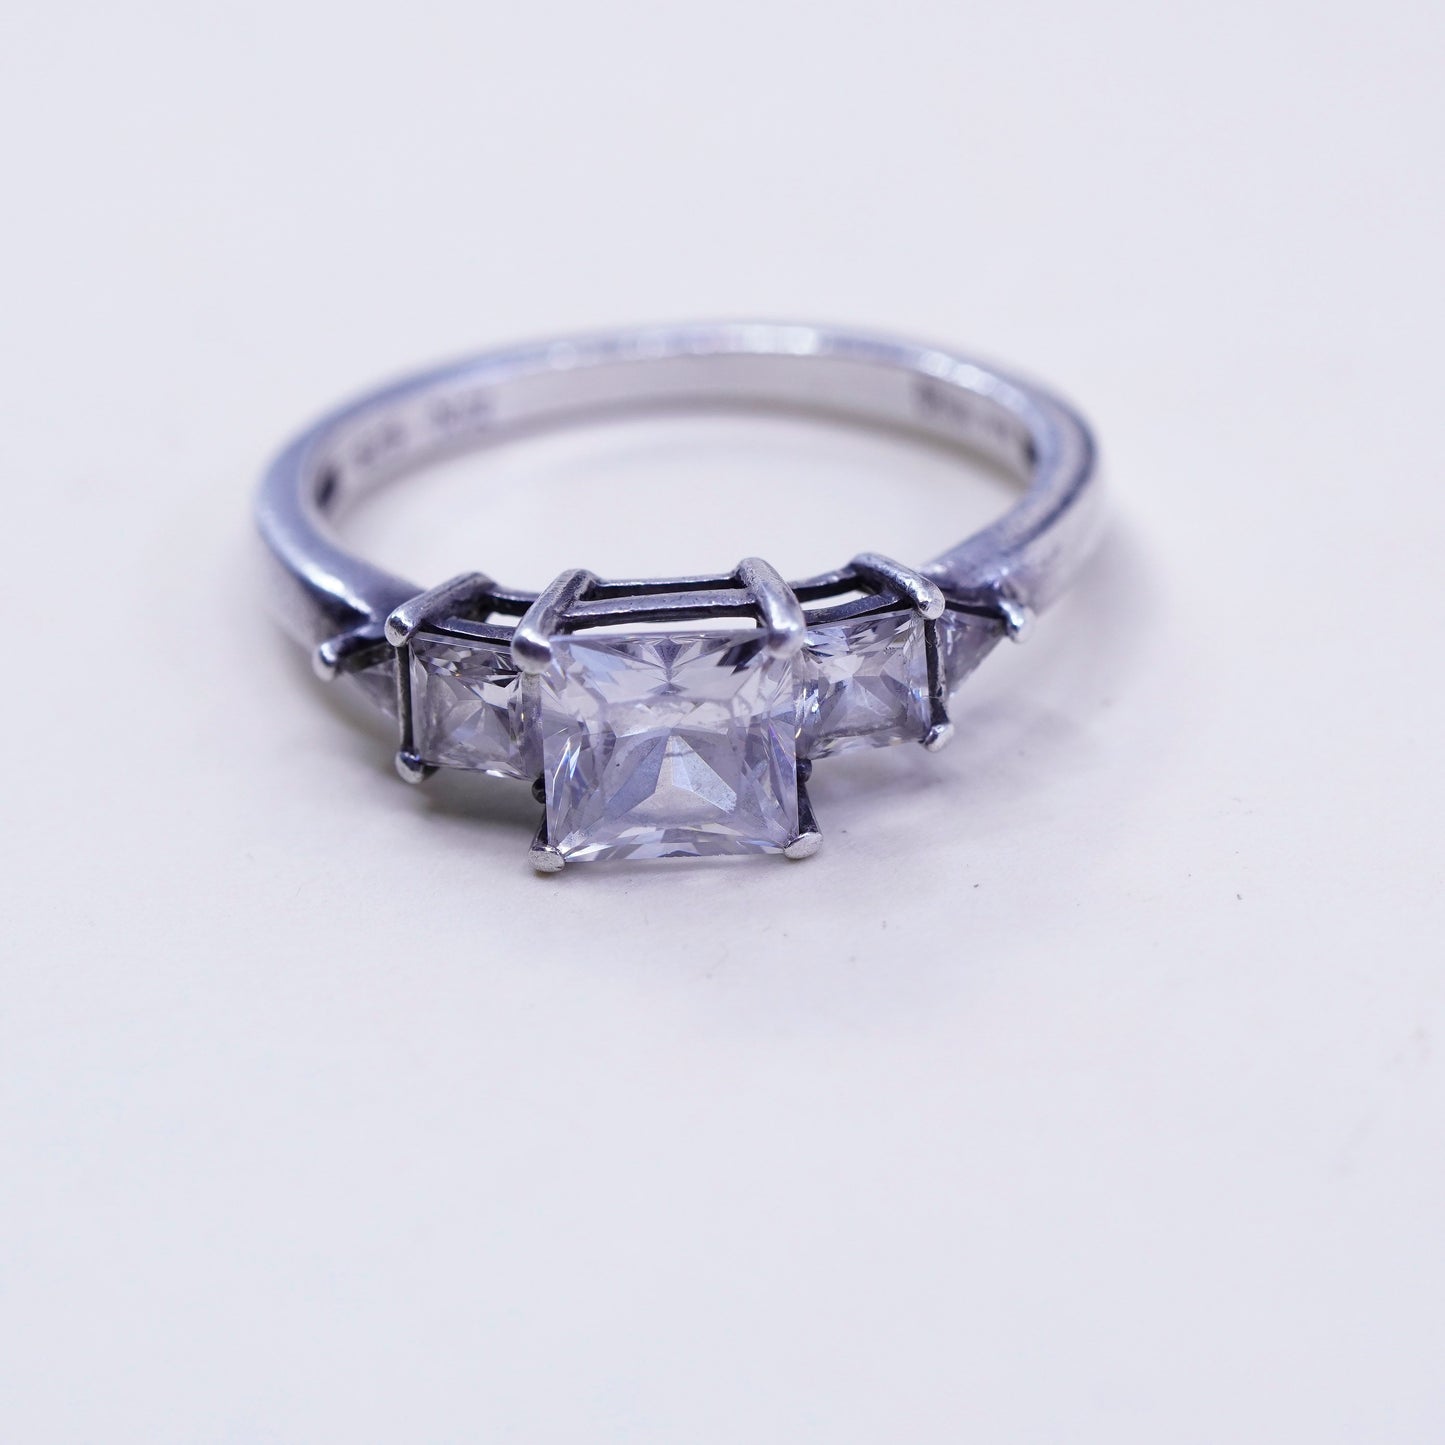 Size 10, DO Sterling 925 silver engagement ring with Cz